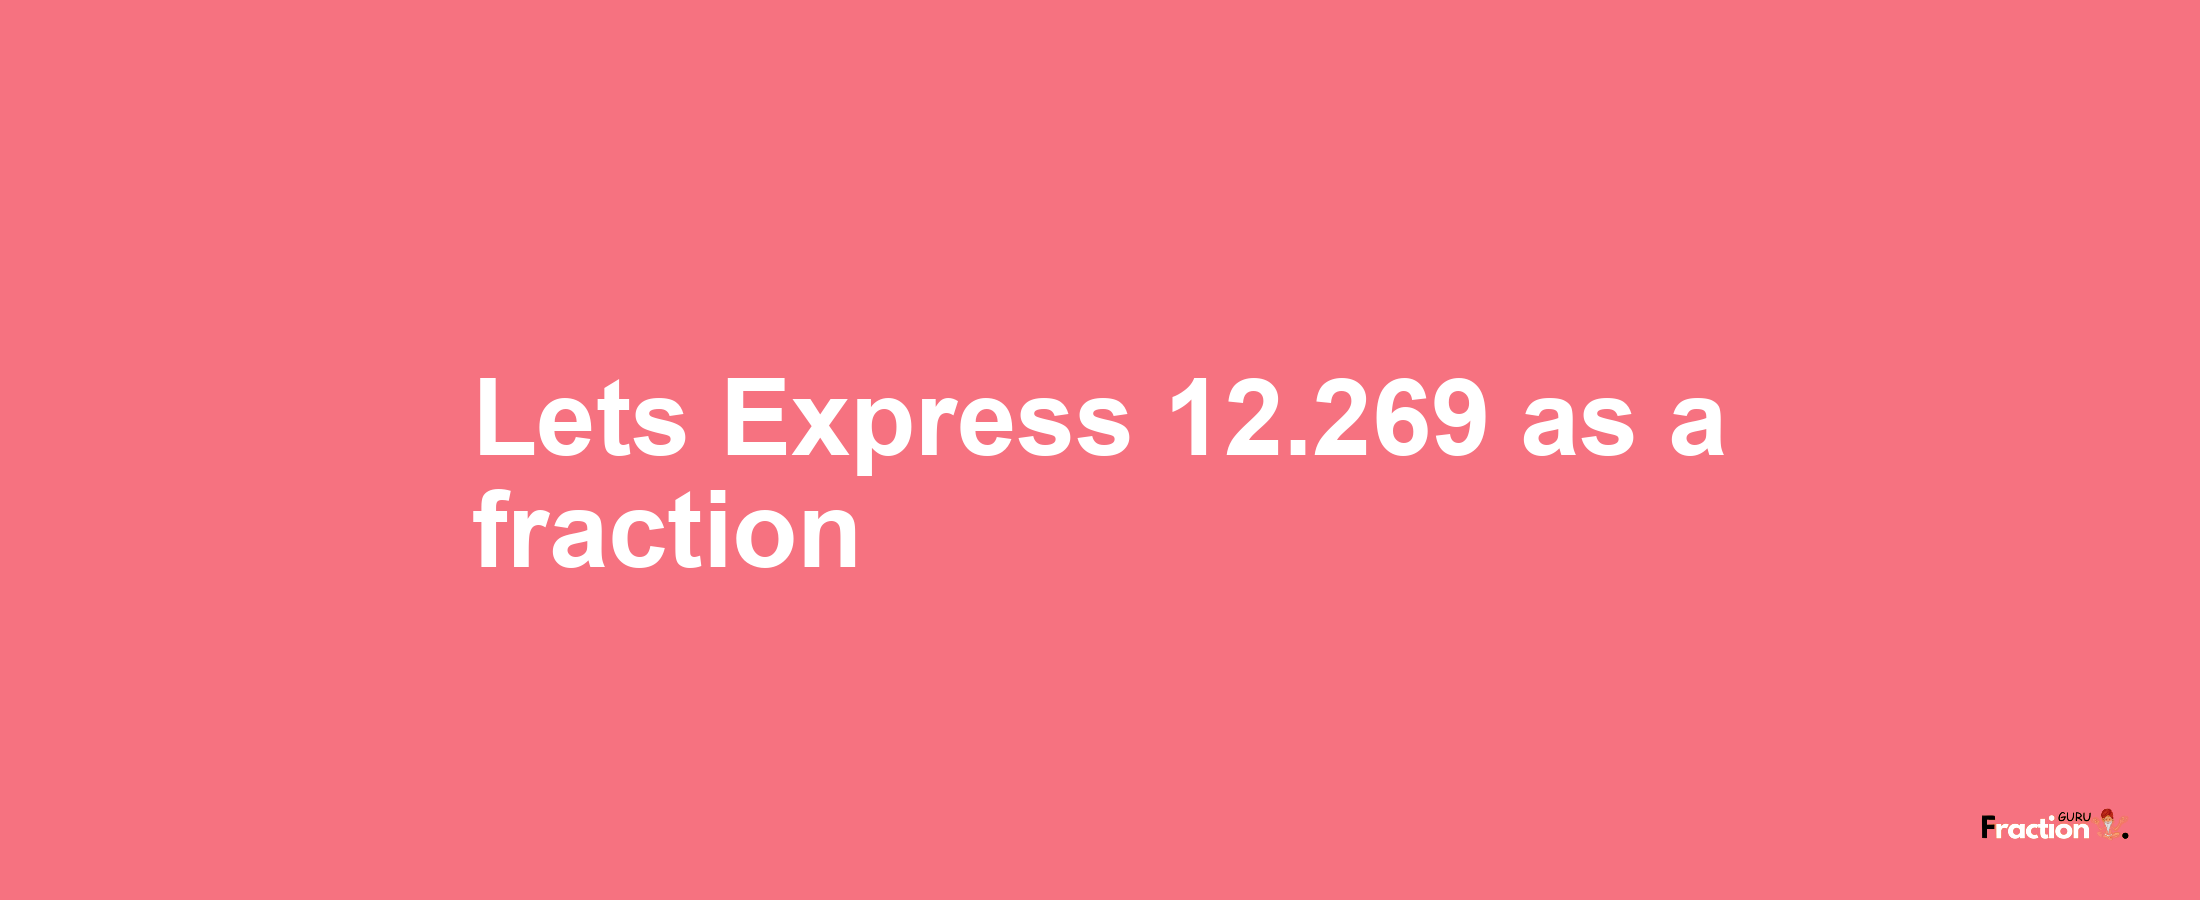 Lets Express 12.269 as afraction